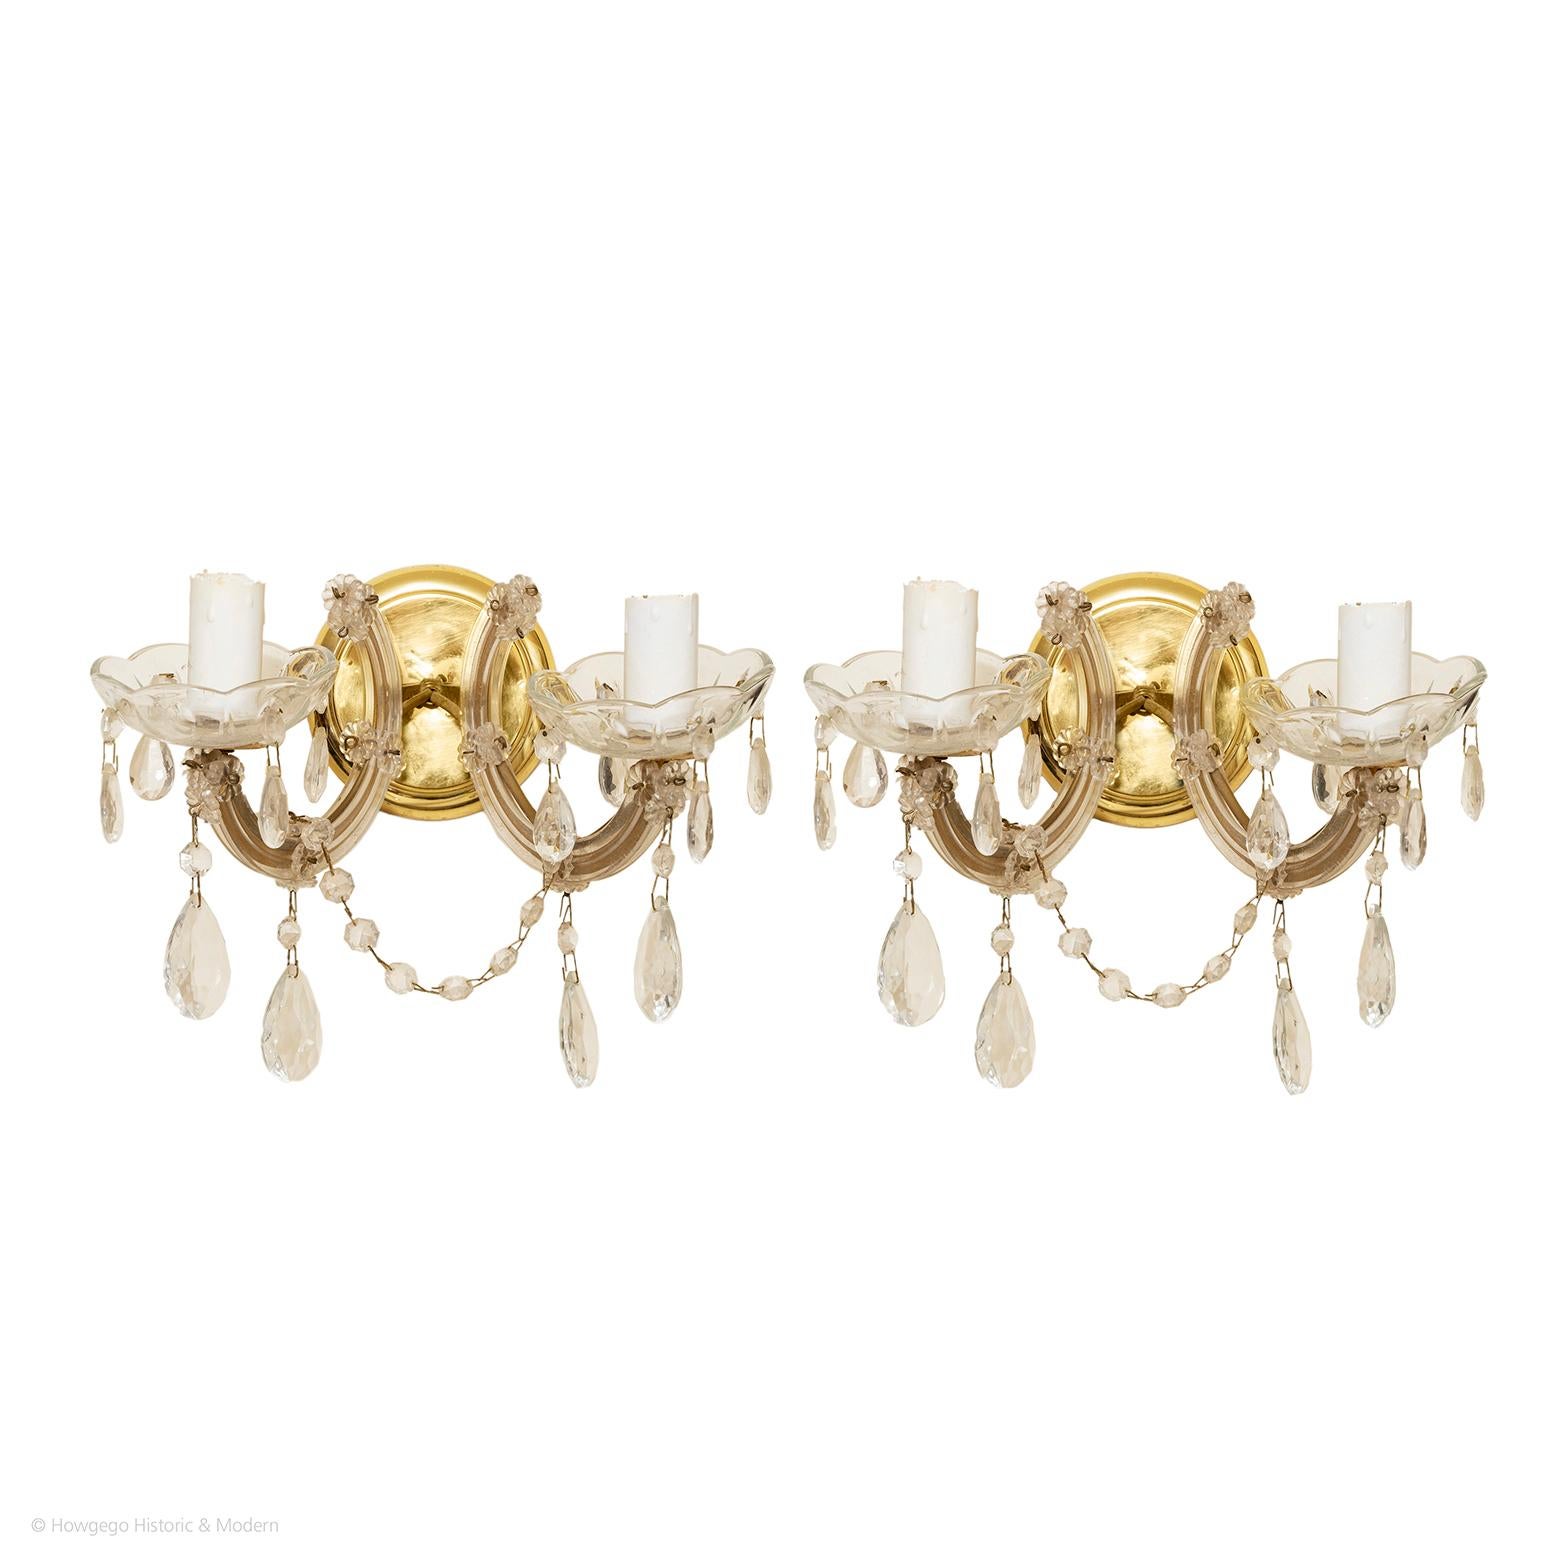 SMALL PAIR OF EDWARDIAN, TWO-ARM, GILT-BRASS & GLASS WALL SCONCES IN THE ROCOCO STYLE

- The lightness, elegance, and an exuberant use of curving and floral ornamentation are characteristic features of the Rococo period
- The glass enhances the